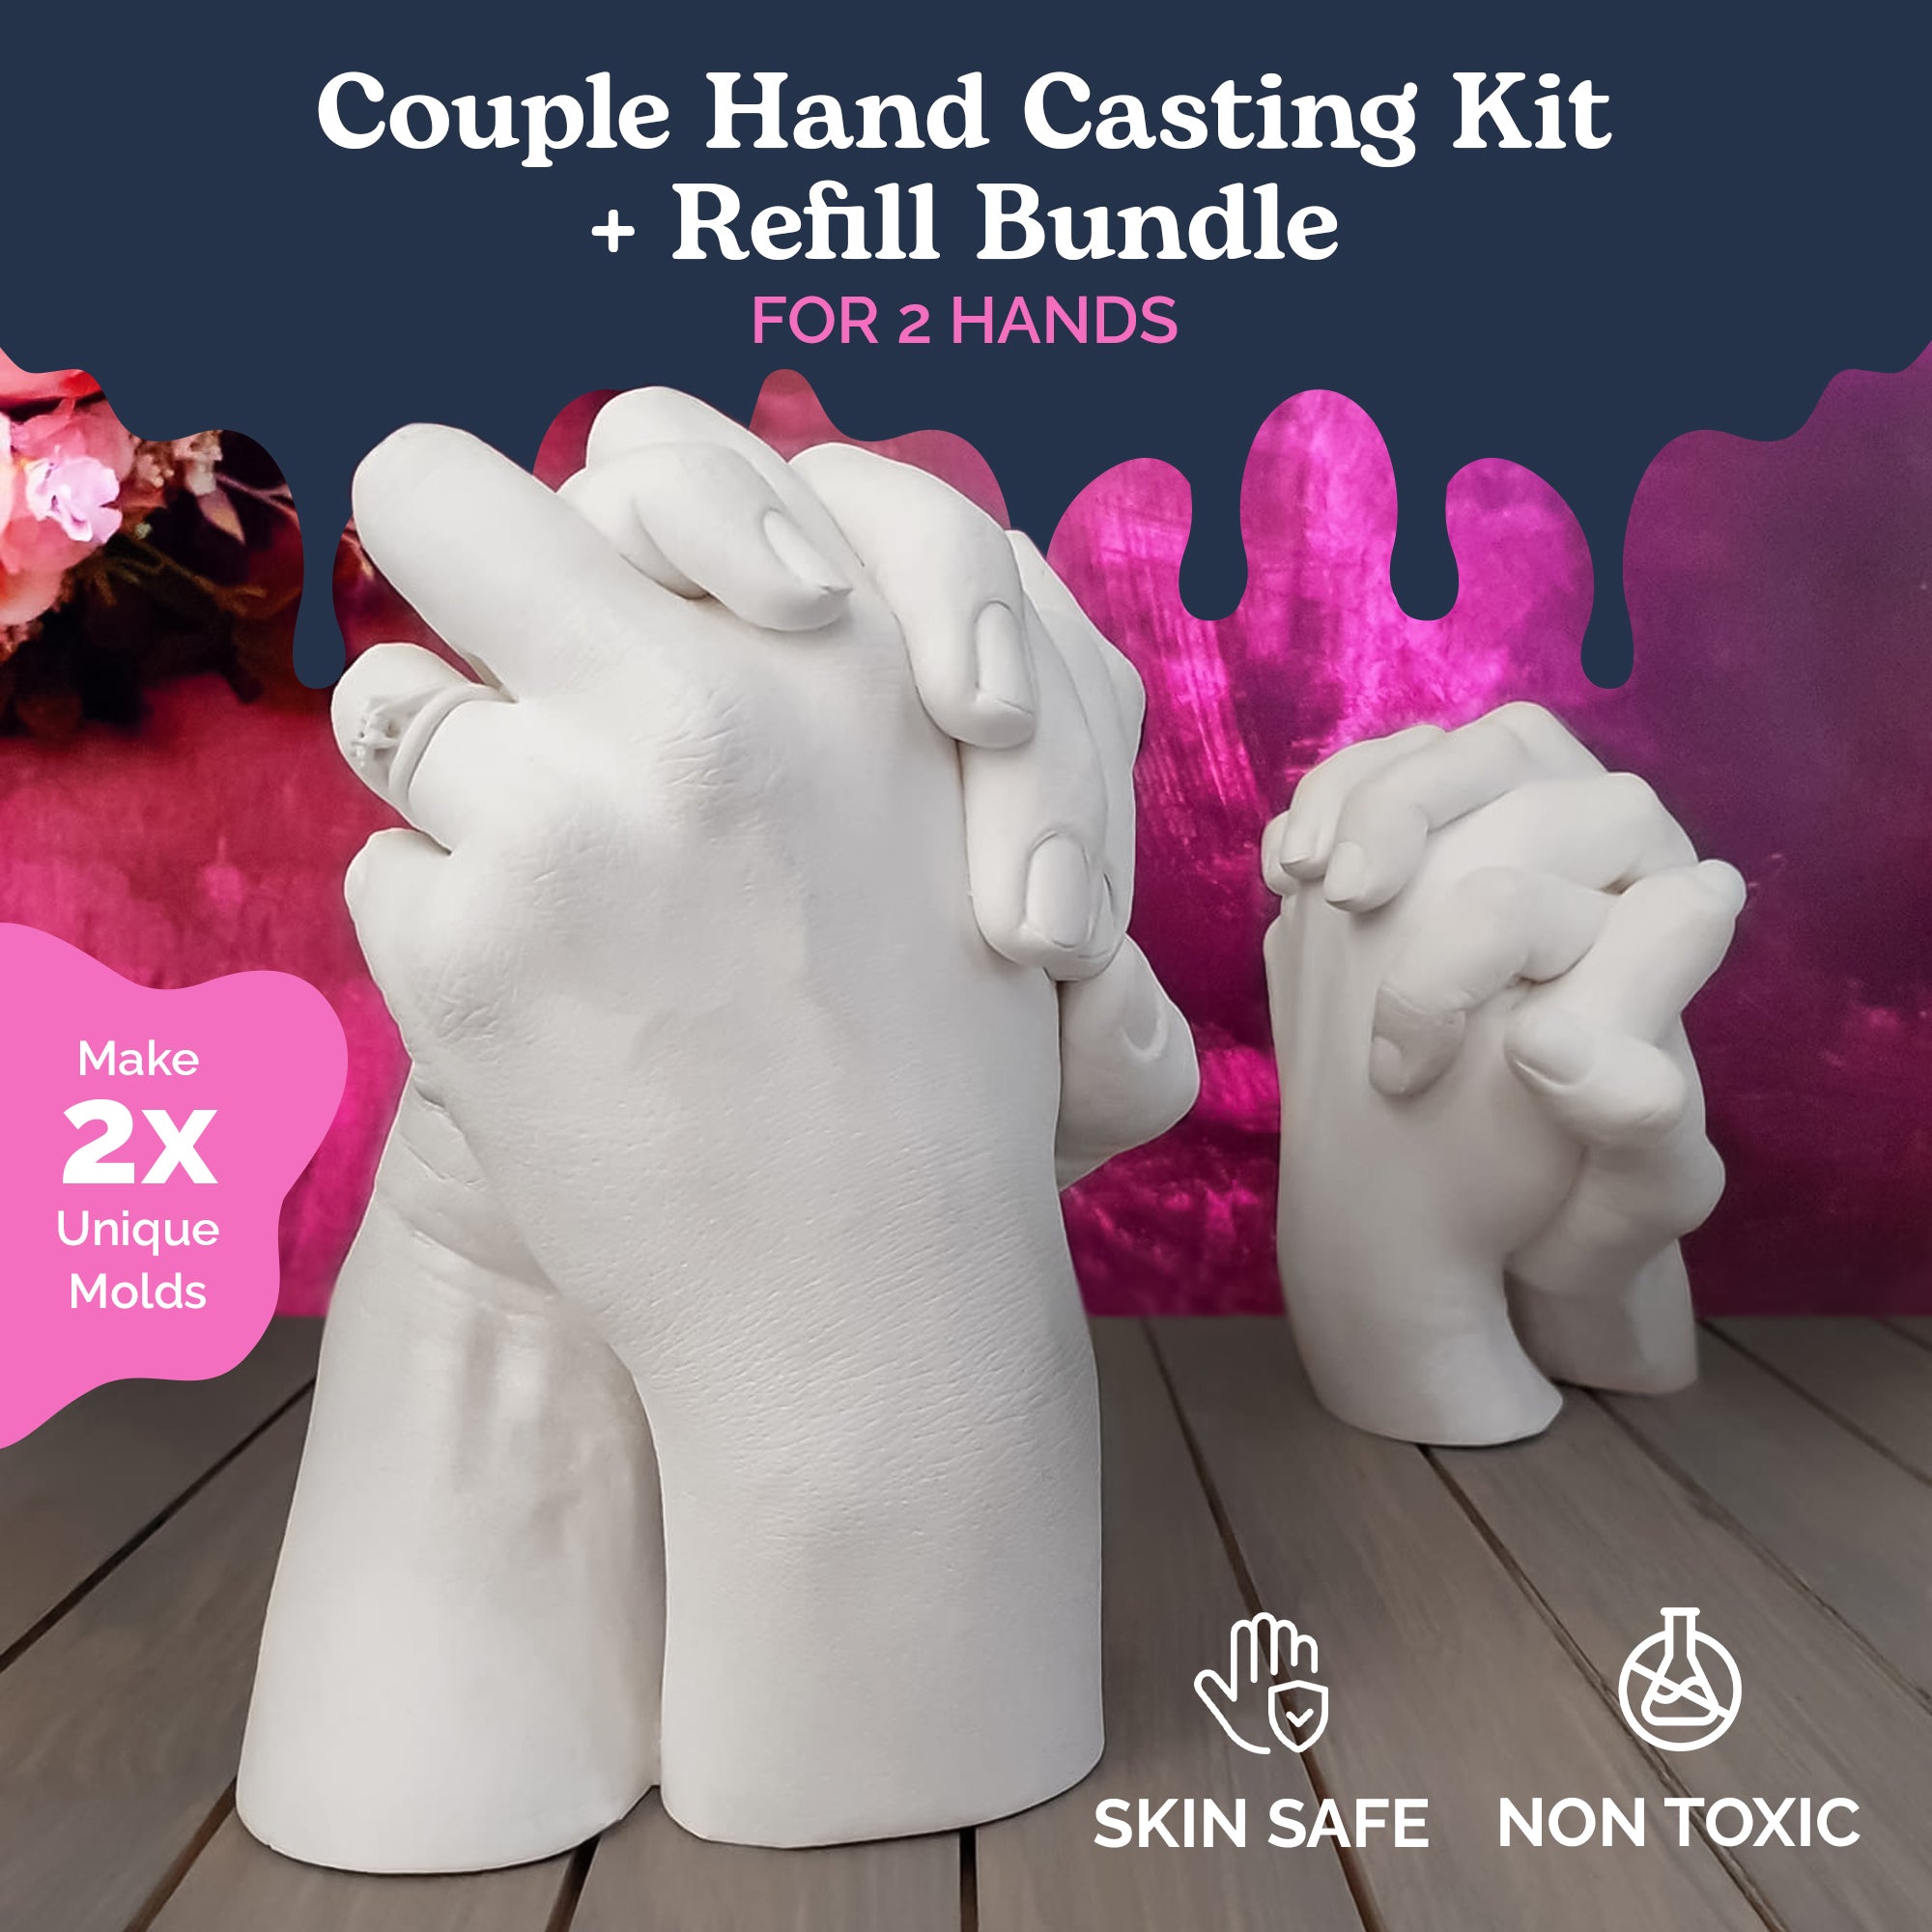  Hand Casting Kit Couples